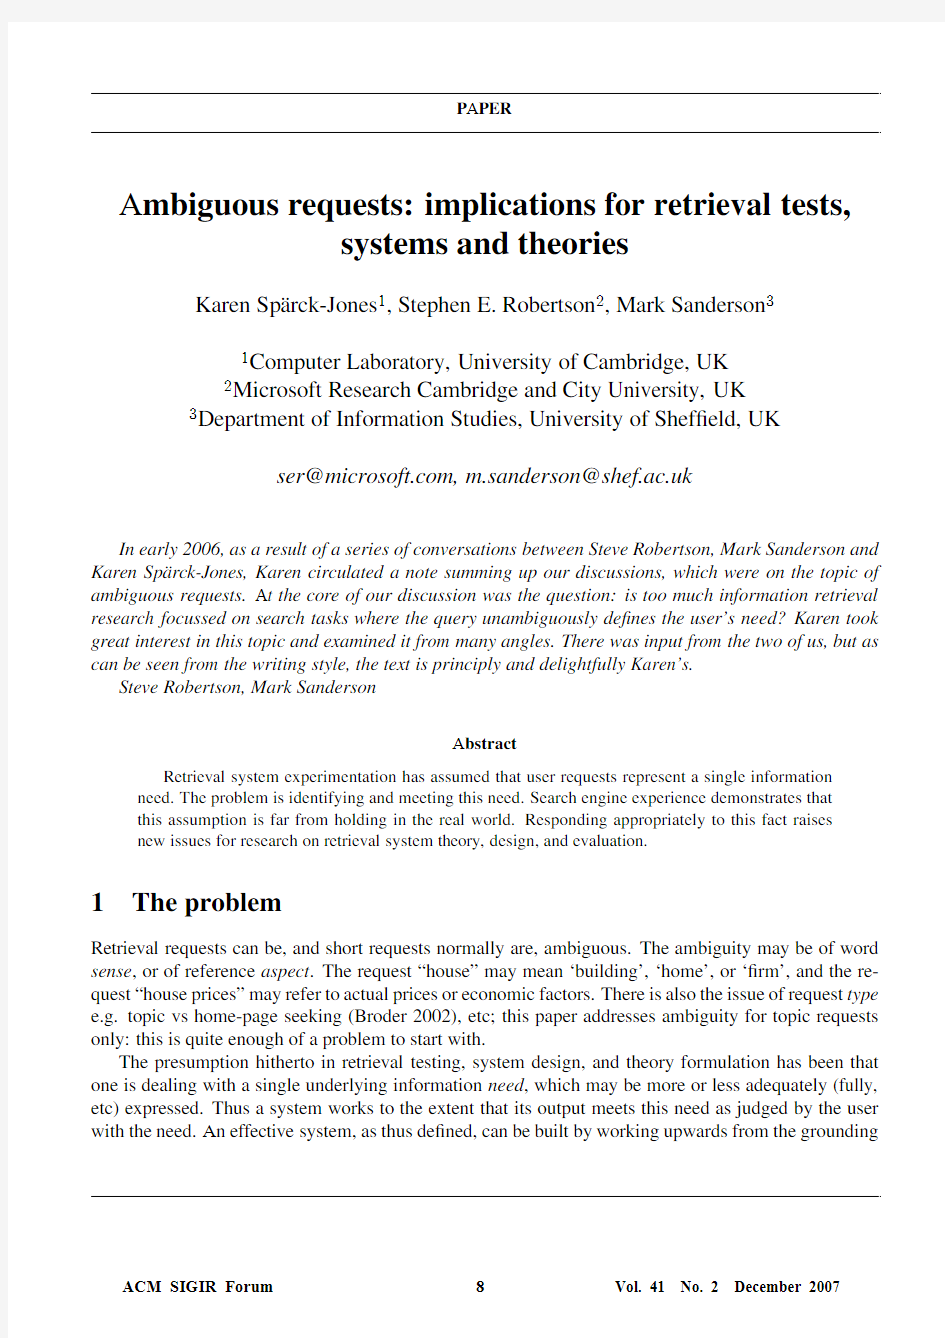 PAPER Ambiguous requests implications for retrieval tests, systems and theories